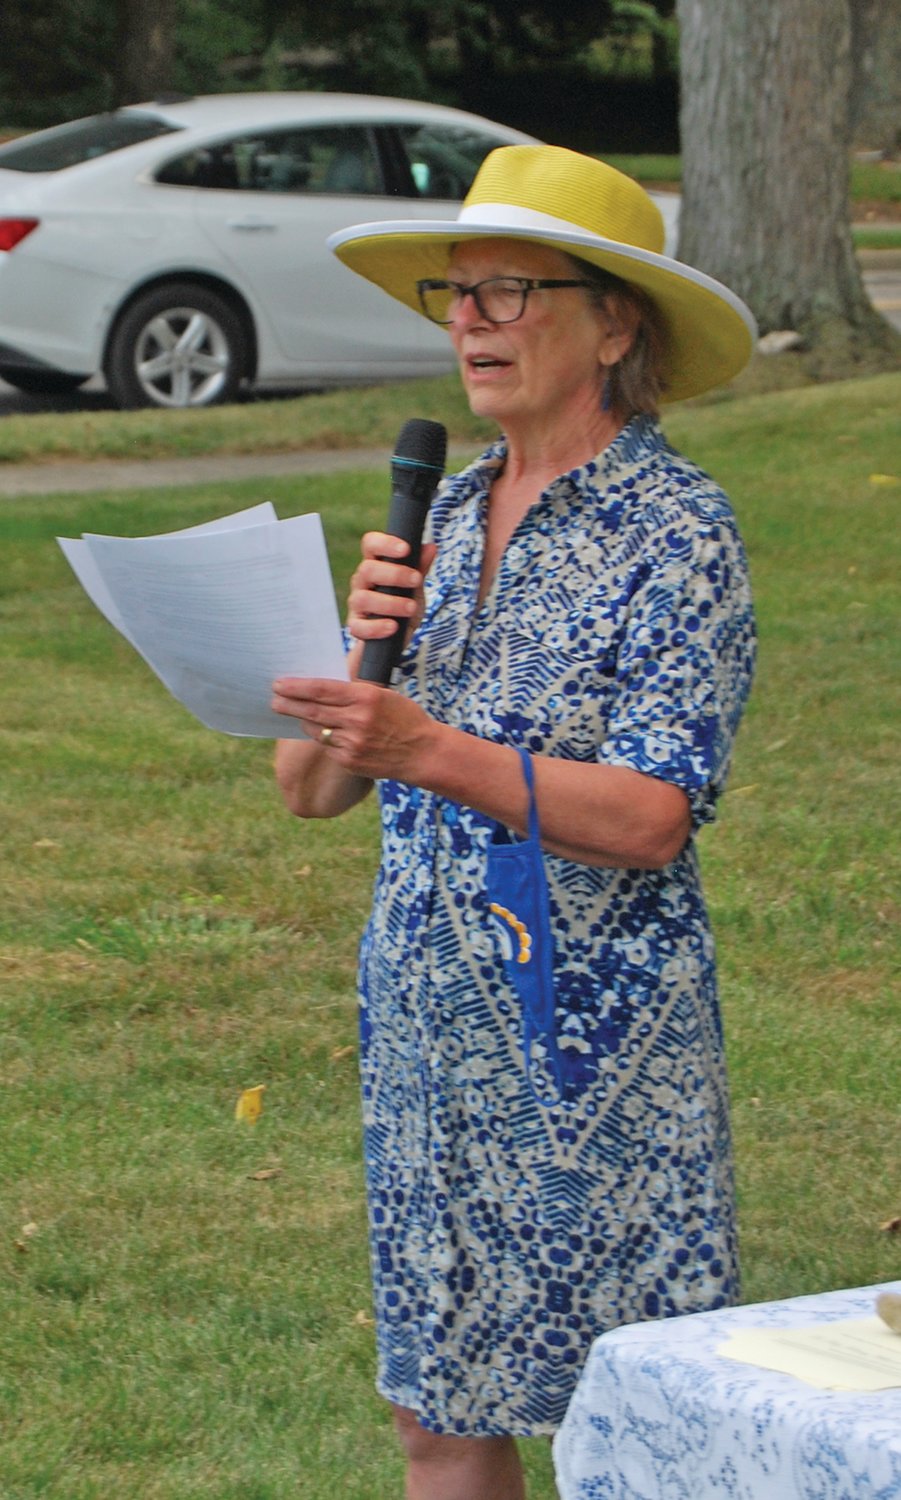 Helen Hudson, president of the League of Women Voters of Montgomery County, speaks Wednesday at a dedication ceremony for a historical marker recognizing pioneering physician Dr. Mary Holloway Wilhite on the site of Wilhite’s home and office at Grant and Wabash Avenues.